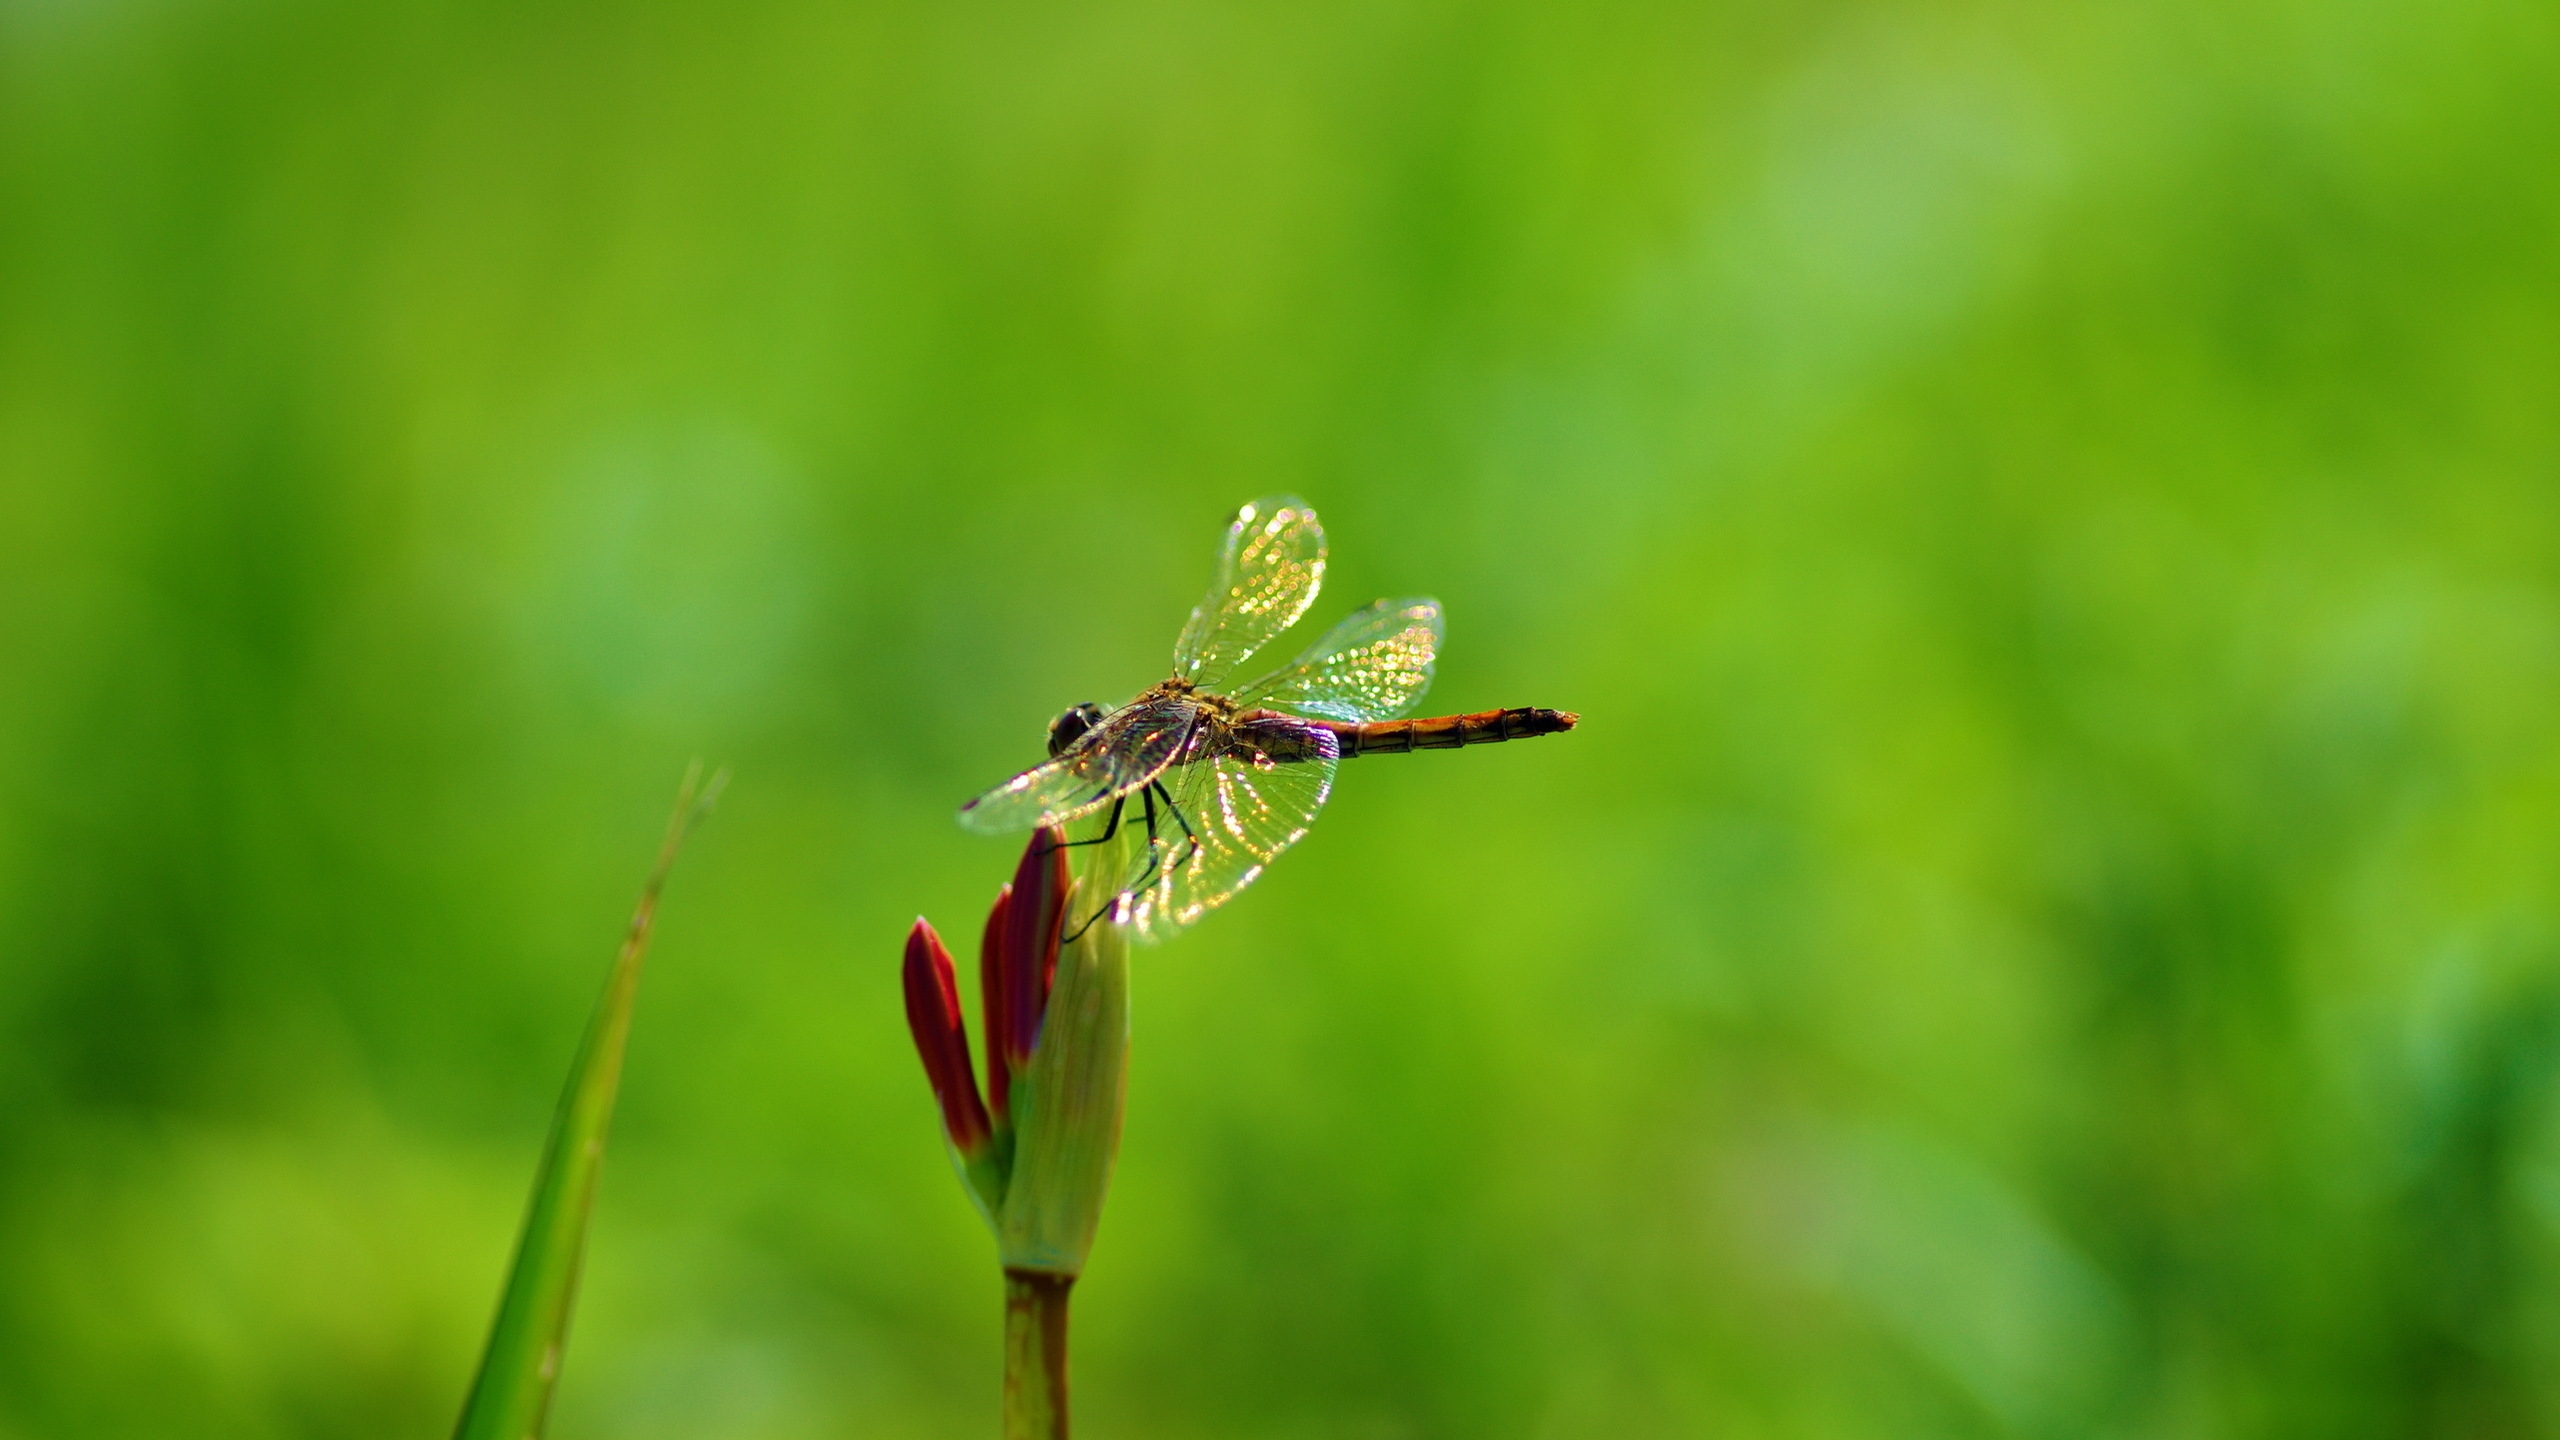 Dragonfly on Plant for 2560x1440 HDTV resolution